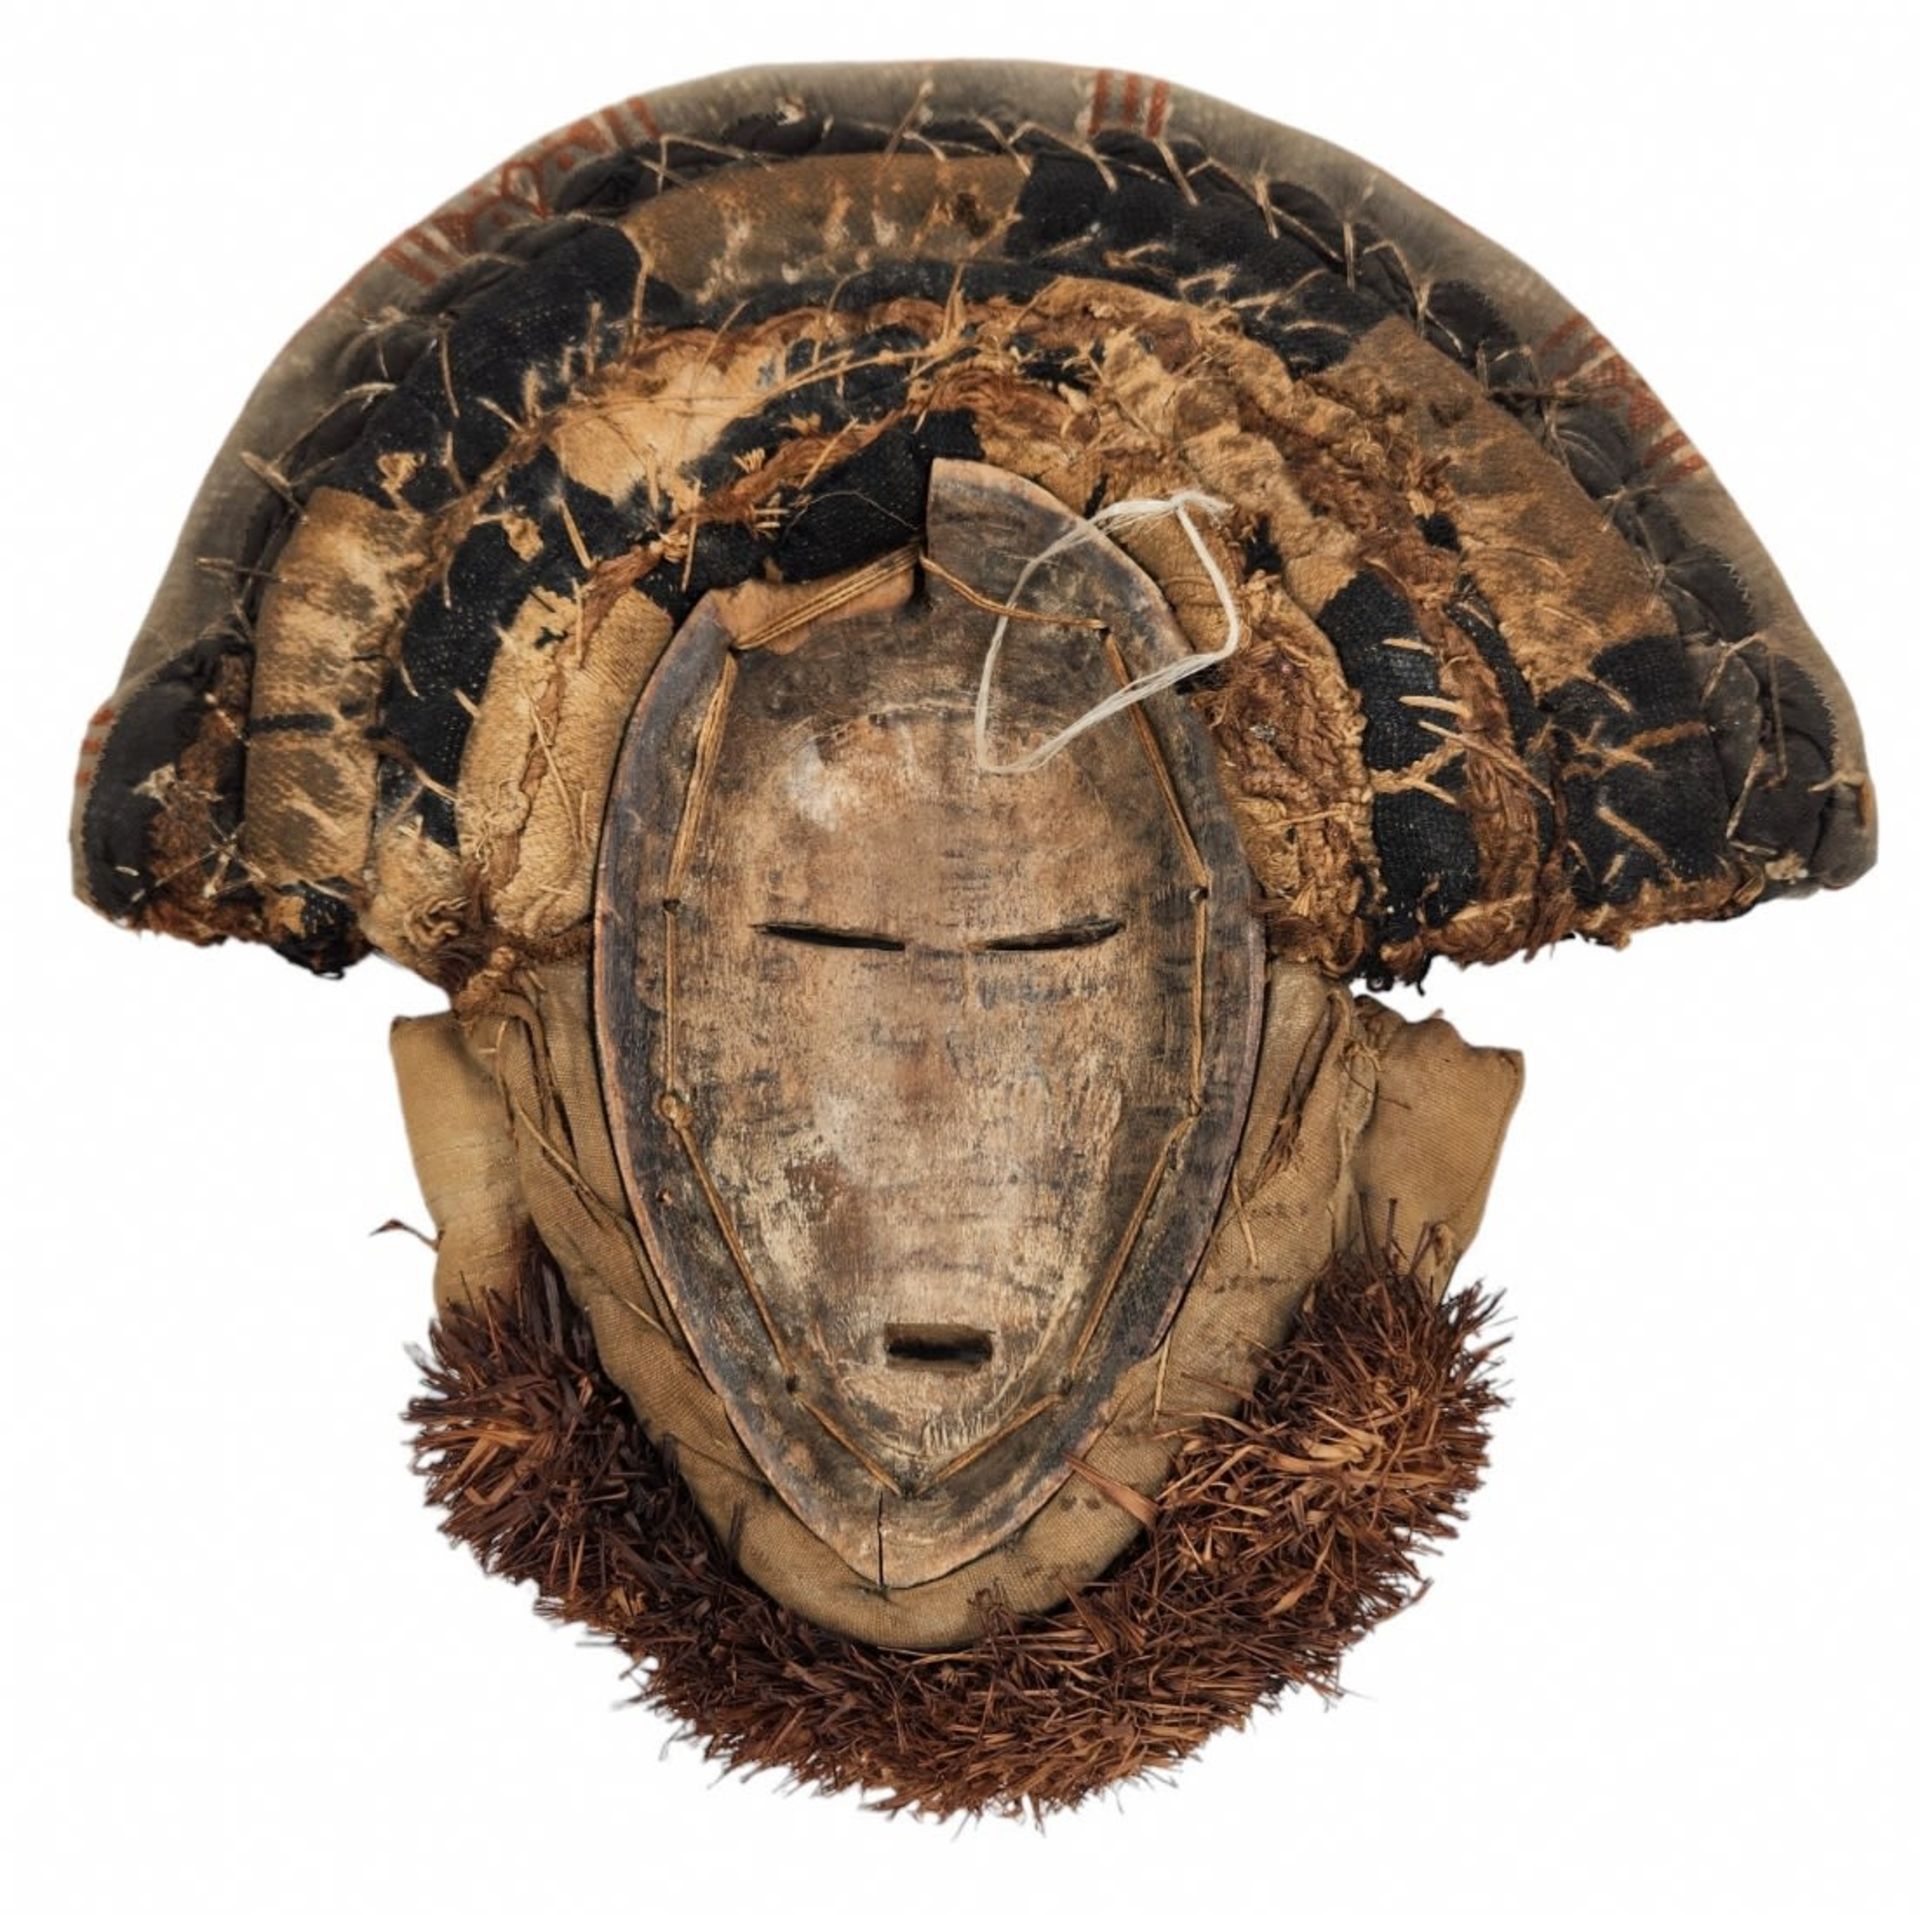 Antique African mask - Dan People, made of wood, fabric, raffia and shells, approximately 1920-1930, - Image 2 of 3